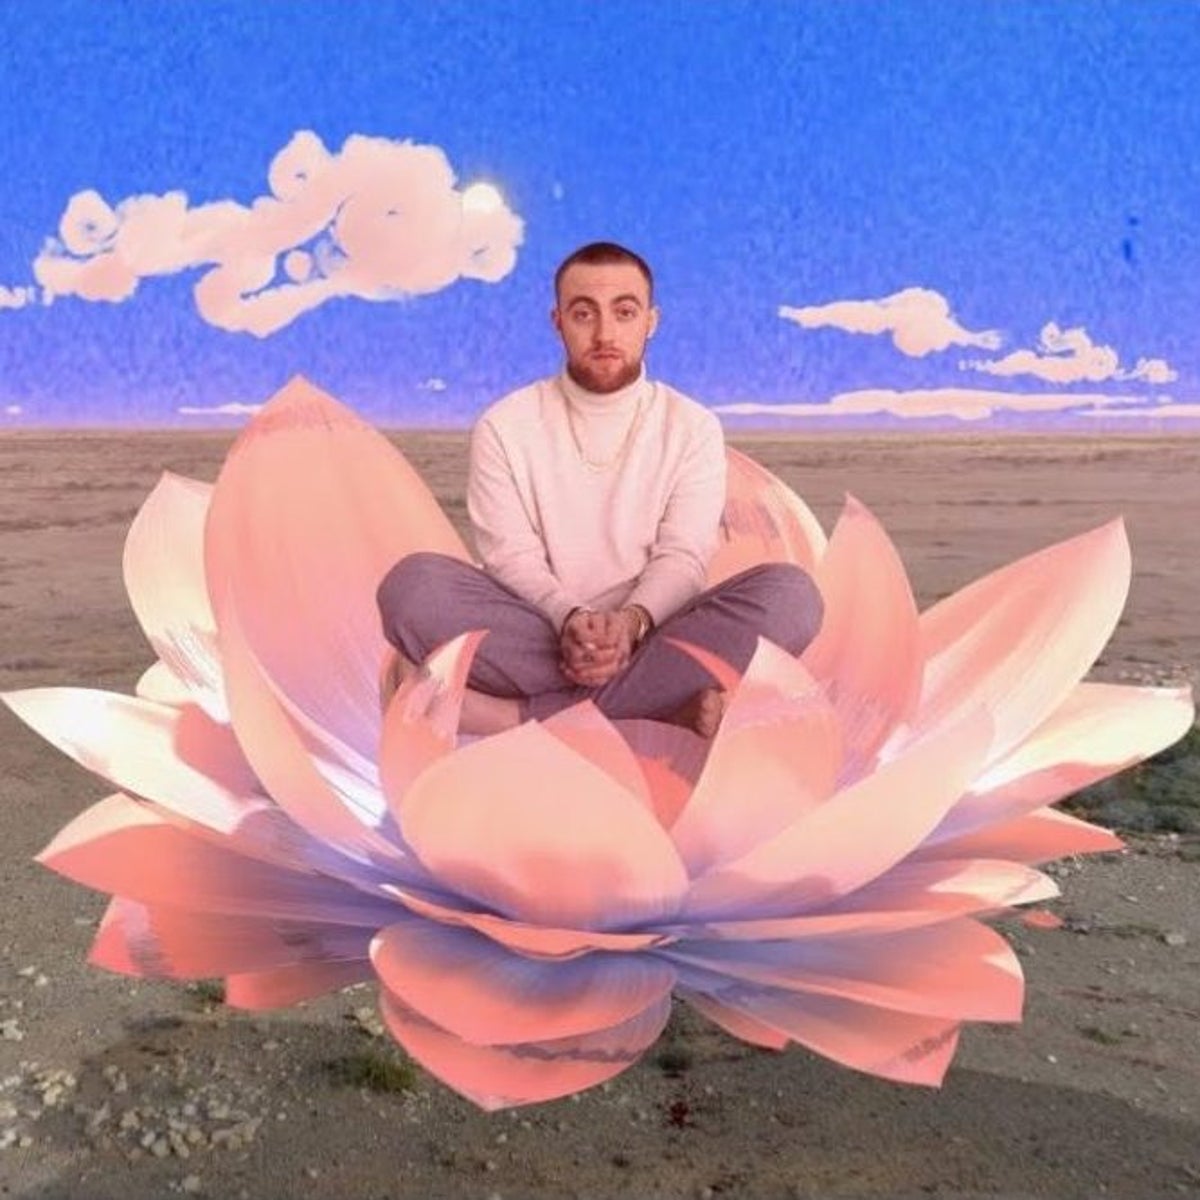 Mac Miller review, Circles: Posthumous album reflects an artist at his  creative peak, The Independent